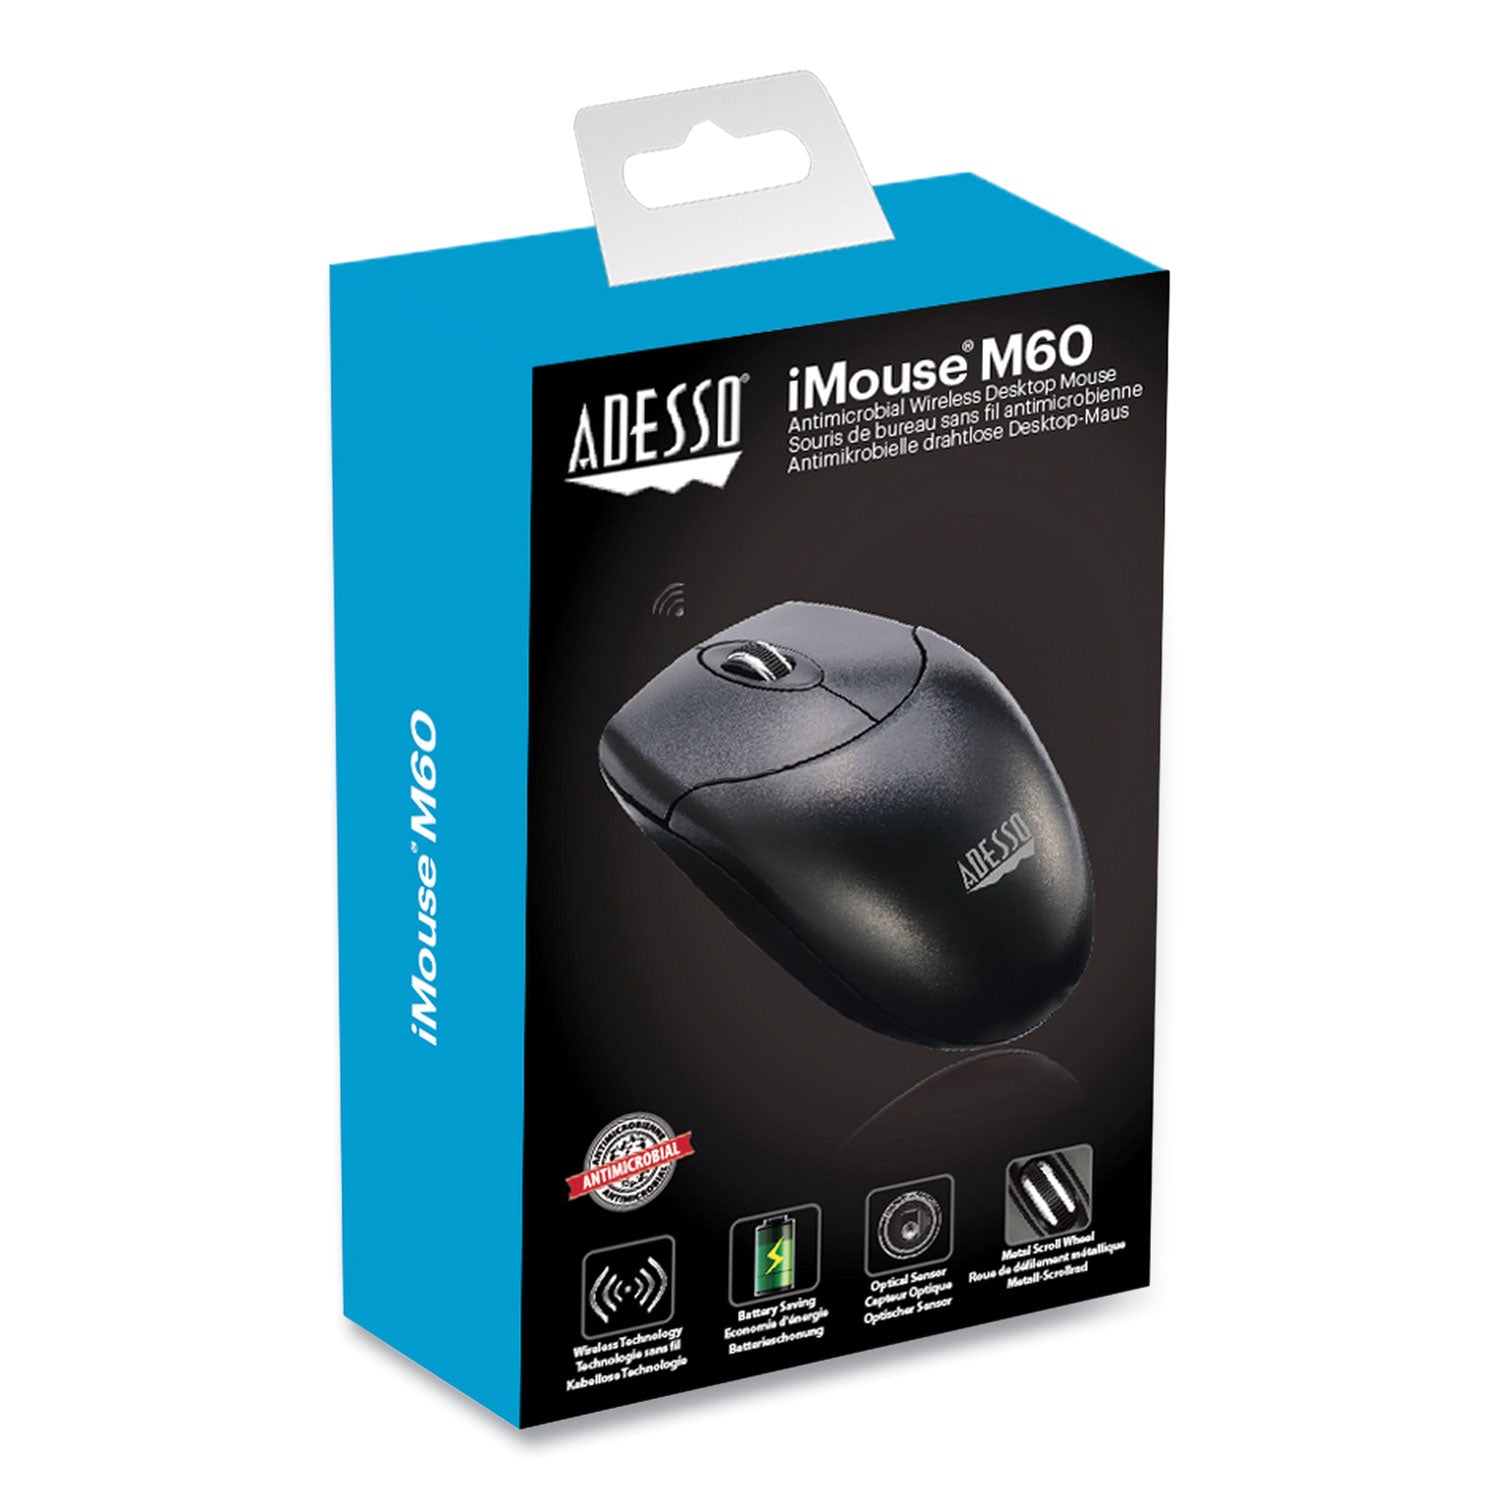 imouse-m60-antimicrobial-wireless-mouse-24-ghz-frequency-30-ft-wireless-range-left-right-hand-use-black_adem60 - 1